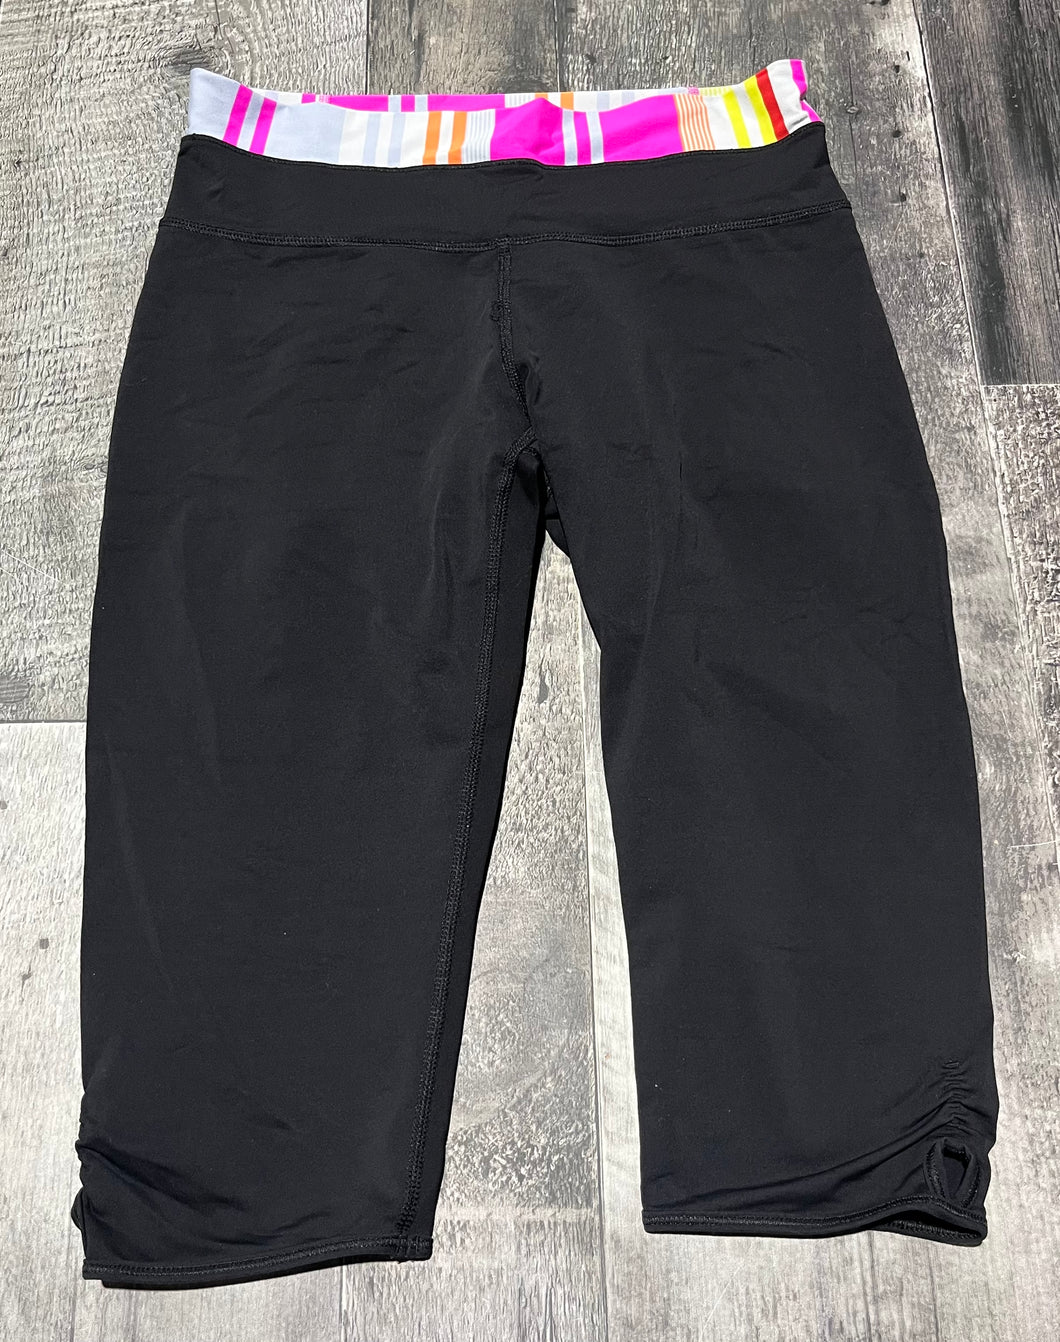 lululemon black/pink/yellow capris - Hers size approx S